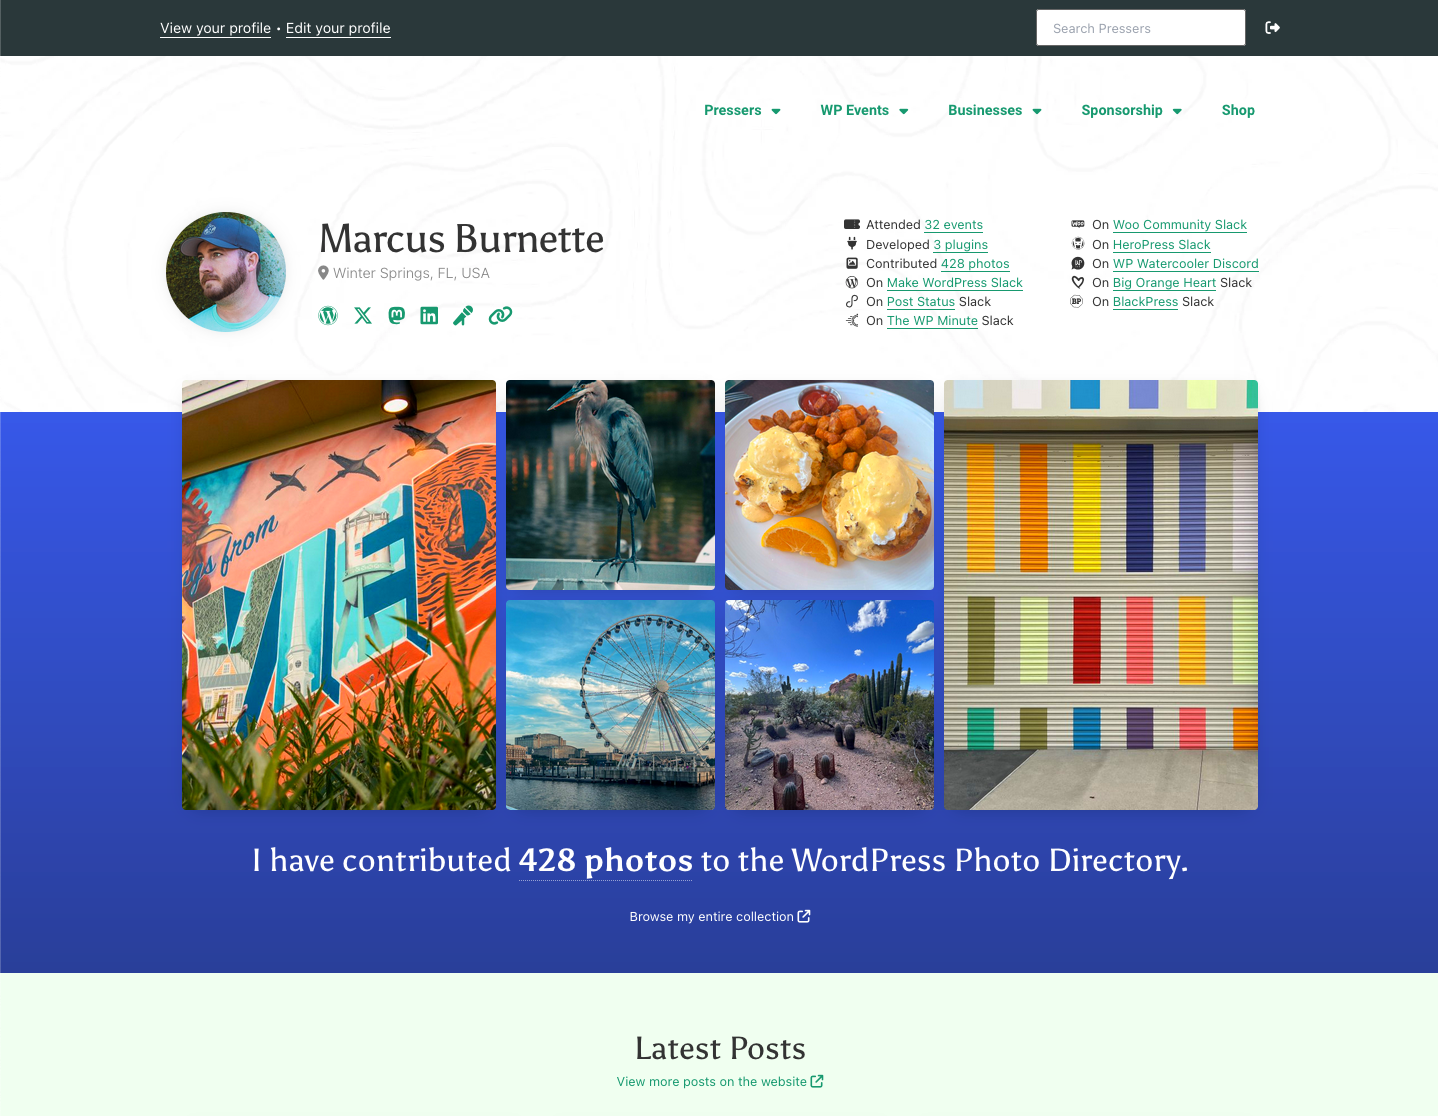 A screenshot of Marcus Burnette's profile on the WP World website. The top section lists his social networks and how you can reach out to him. The middle section has a mosaic of photos that he has submitted to the WordPress Photo Directory. The bottom section is cropped out and only the title is visible, which reads "Latest Posts".